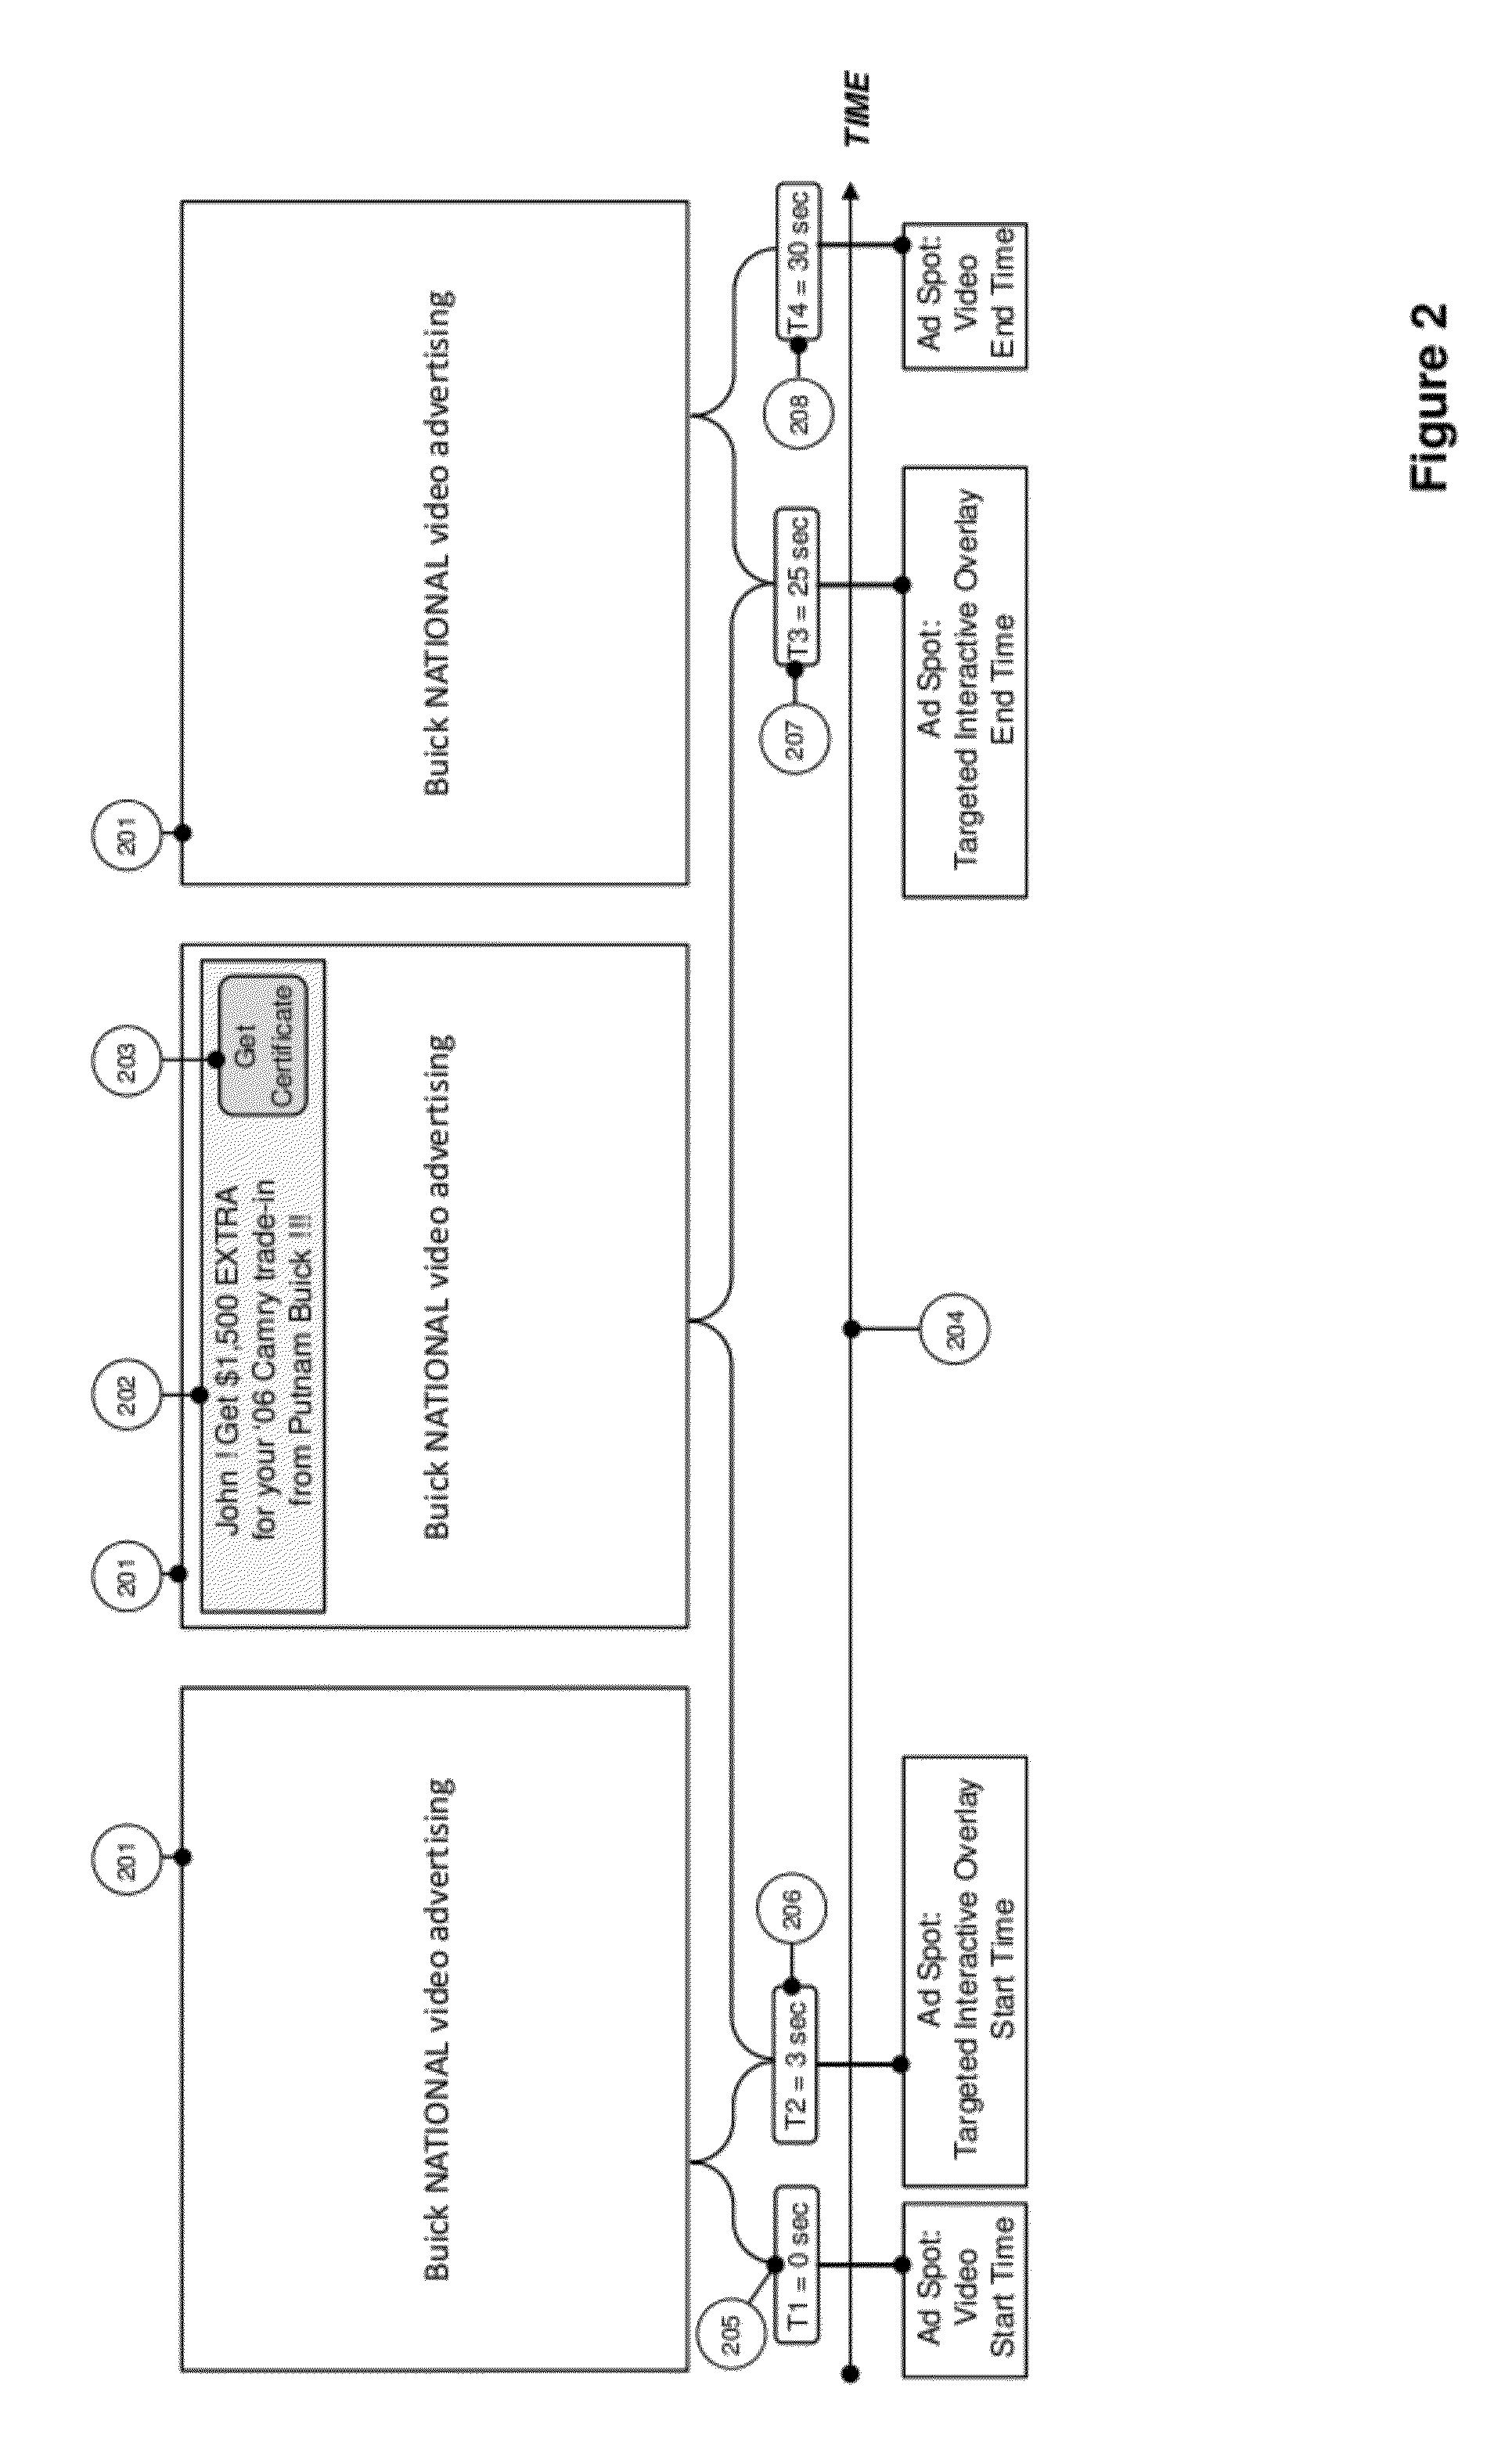 System and method for enhancing and extending video advertisements